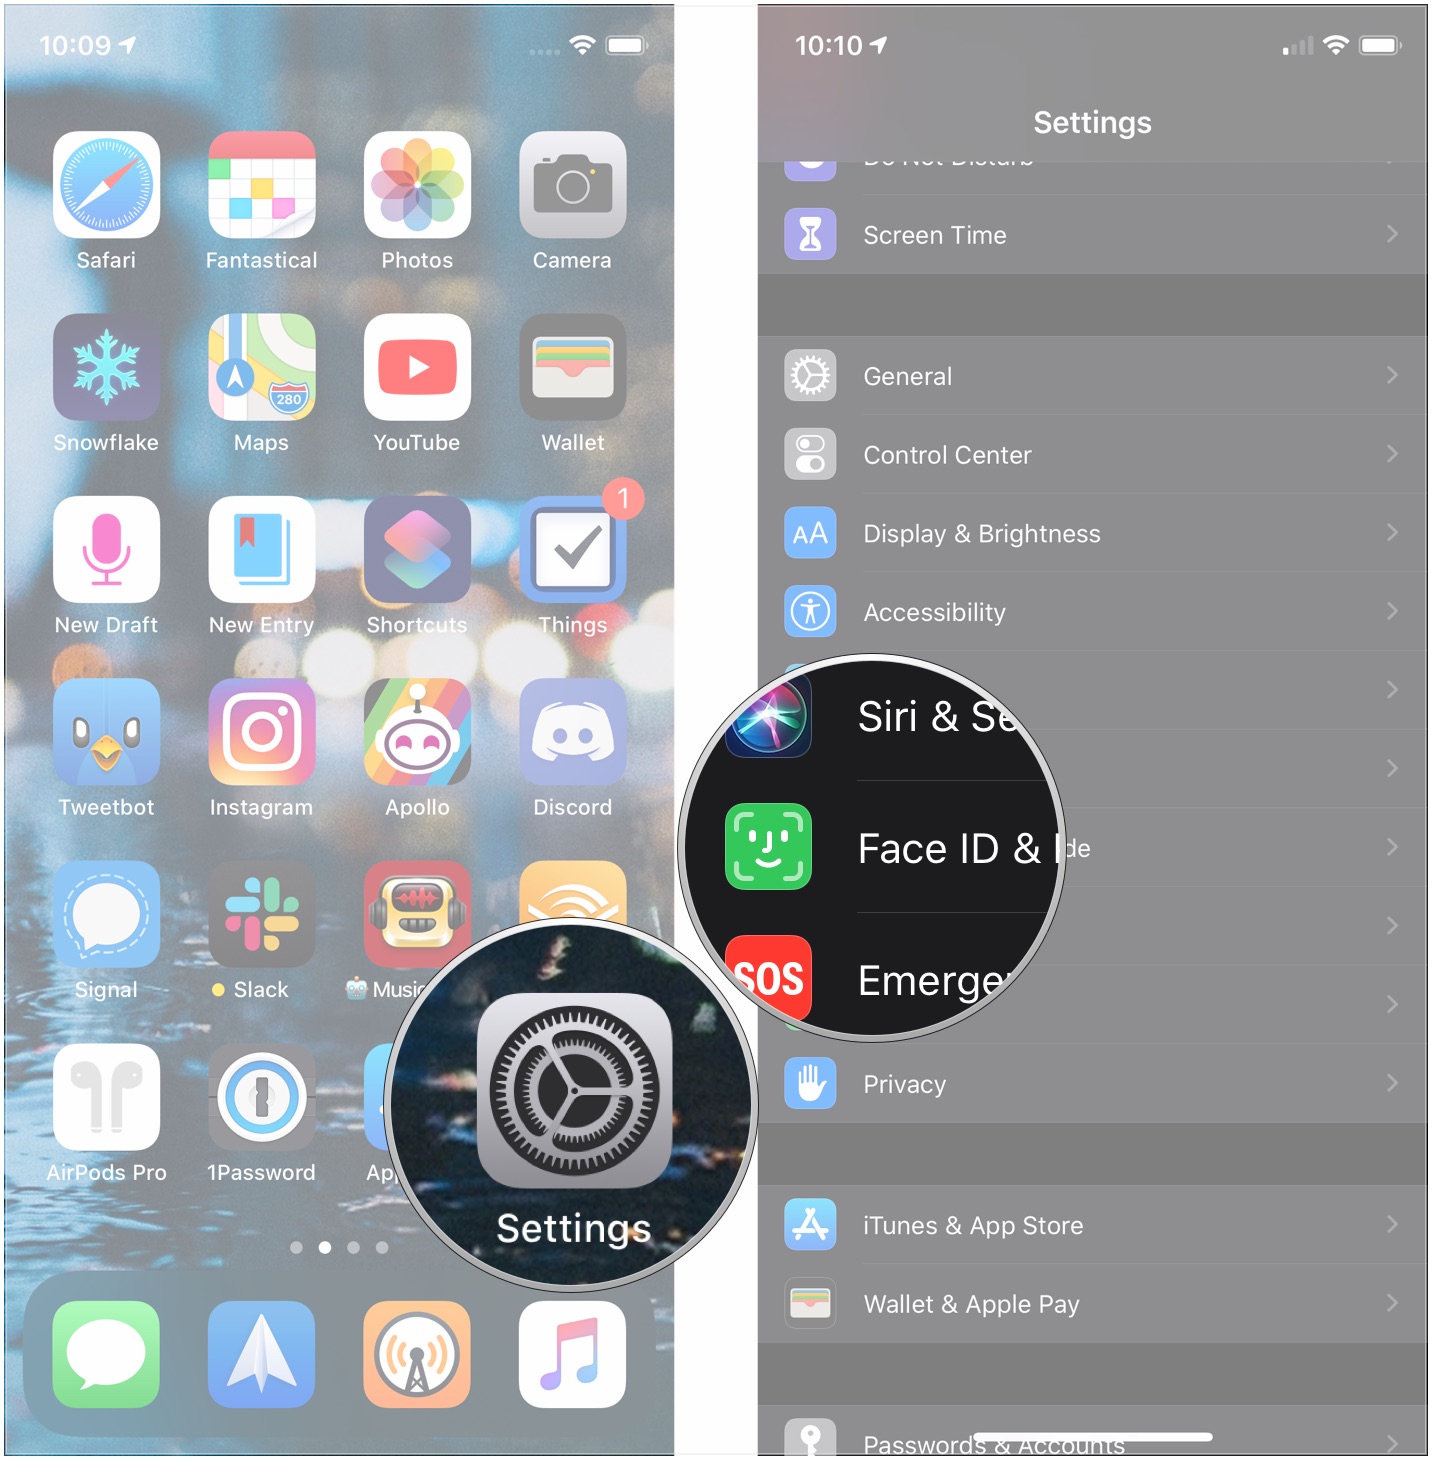 How to turn off access to Notification Center, Control Center, and more on the Lock screen: Open Settings, tap Face ID & Passcode